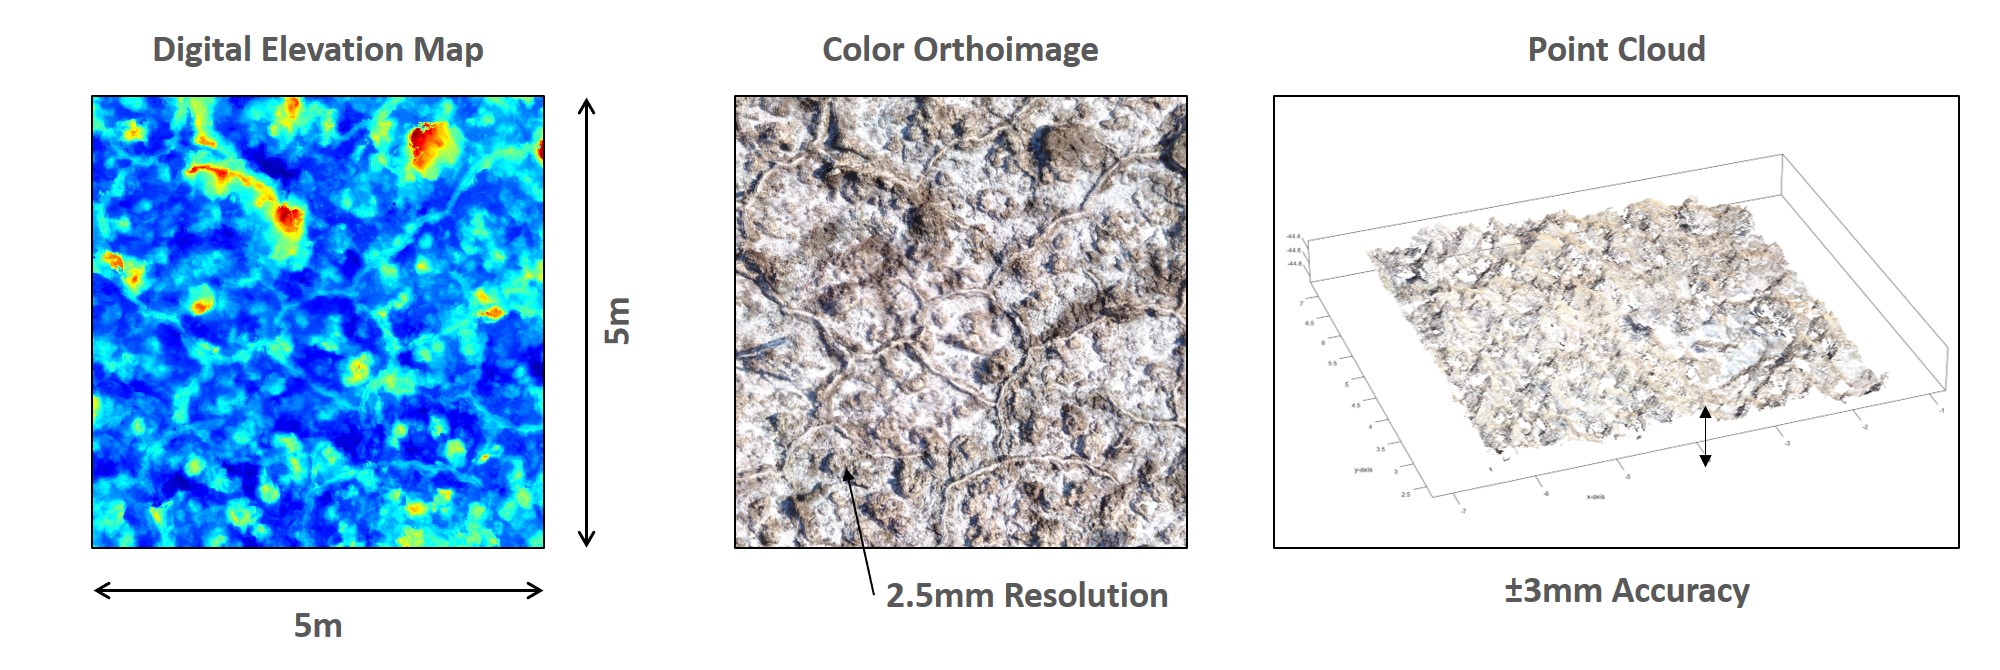 Preview of datatypes in dataset including digital elevation map, color orthoimage, and point cloud.